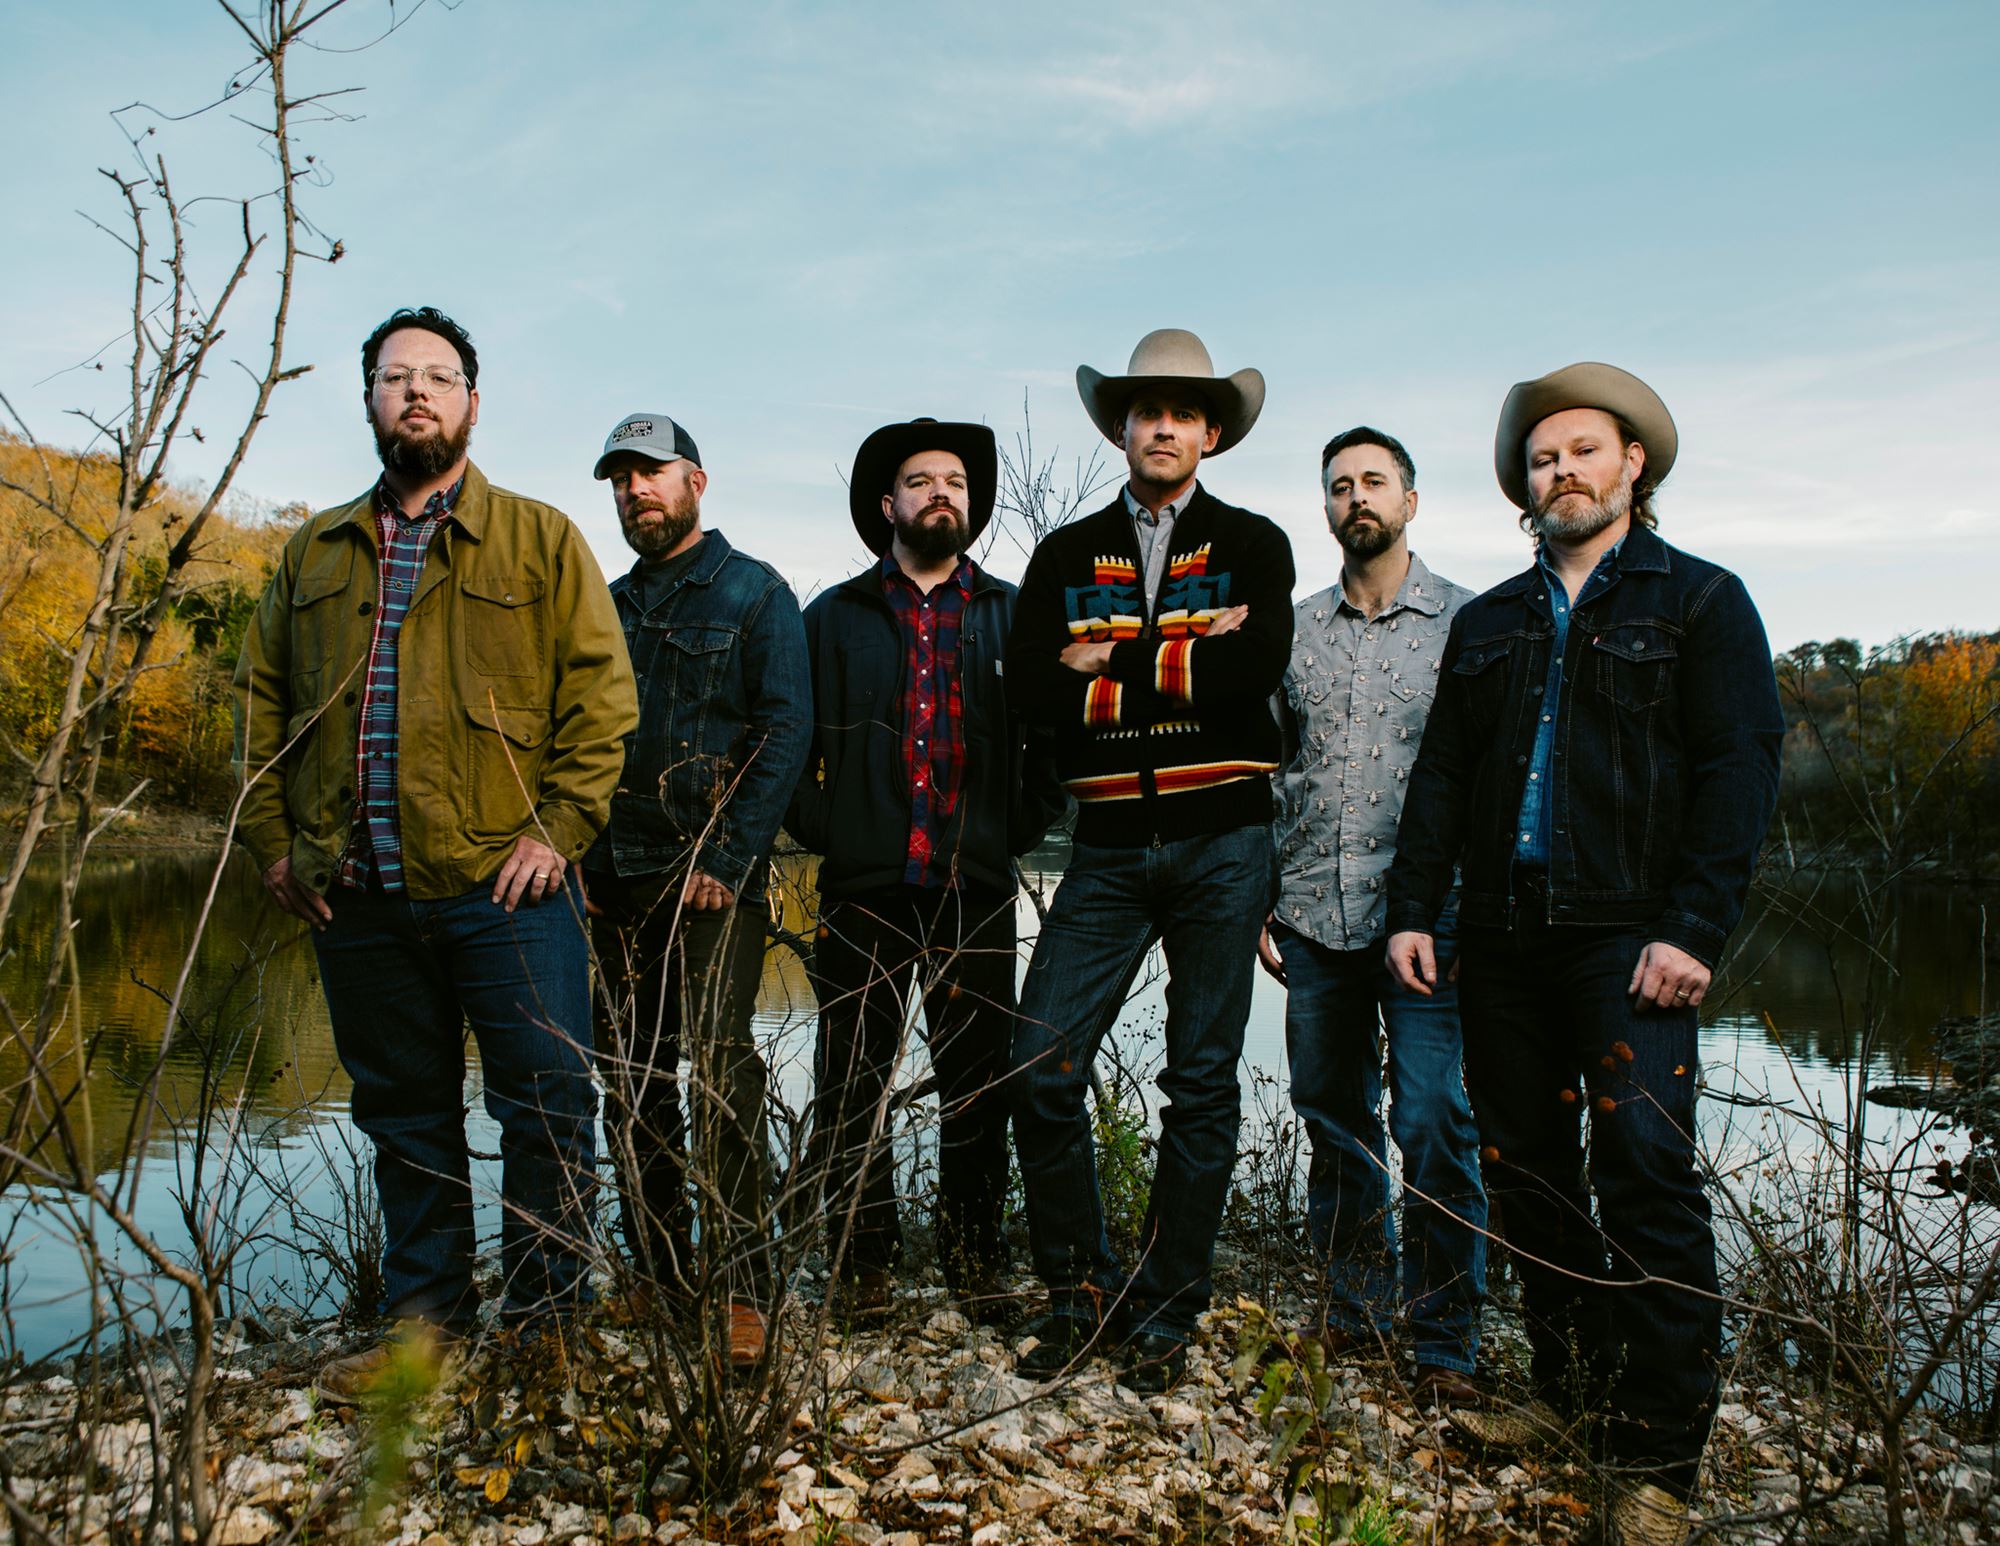 PRCA Rodeo w/ Turnpike Troubadours <br> Wednesday, Feb. 22 at 7 PM